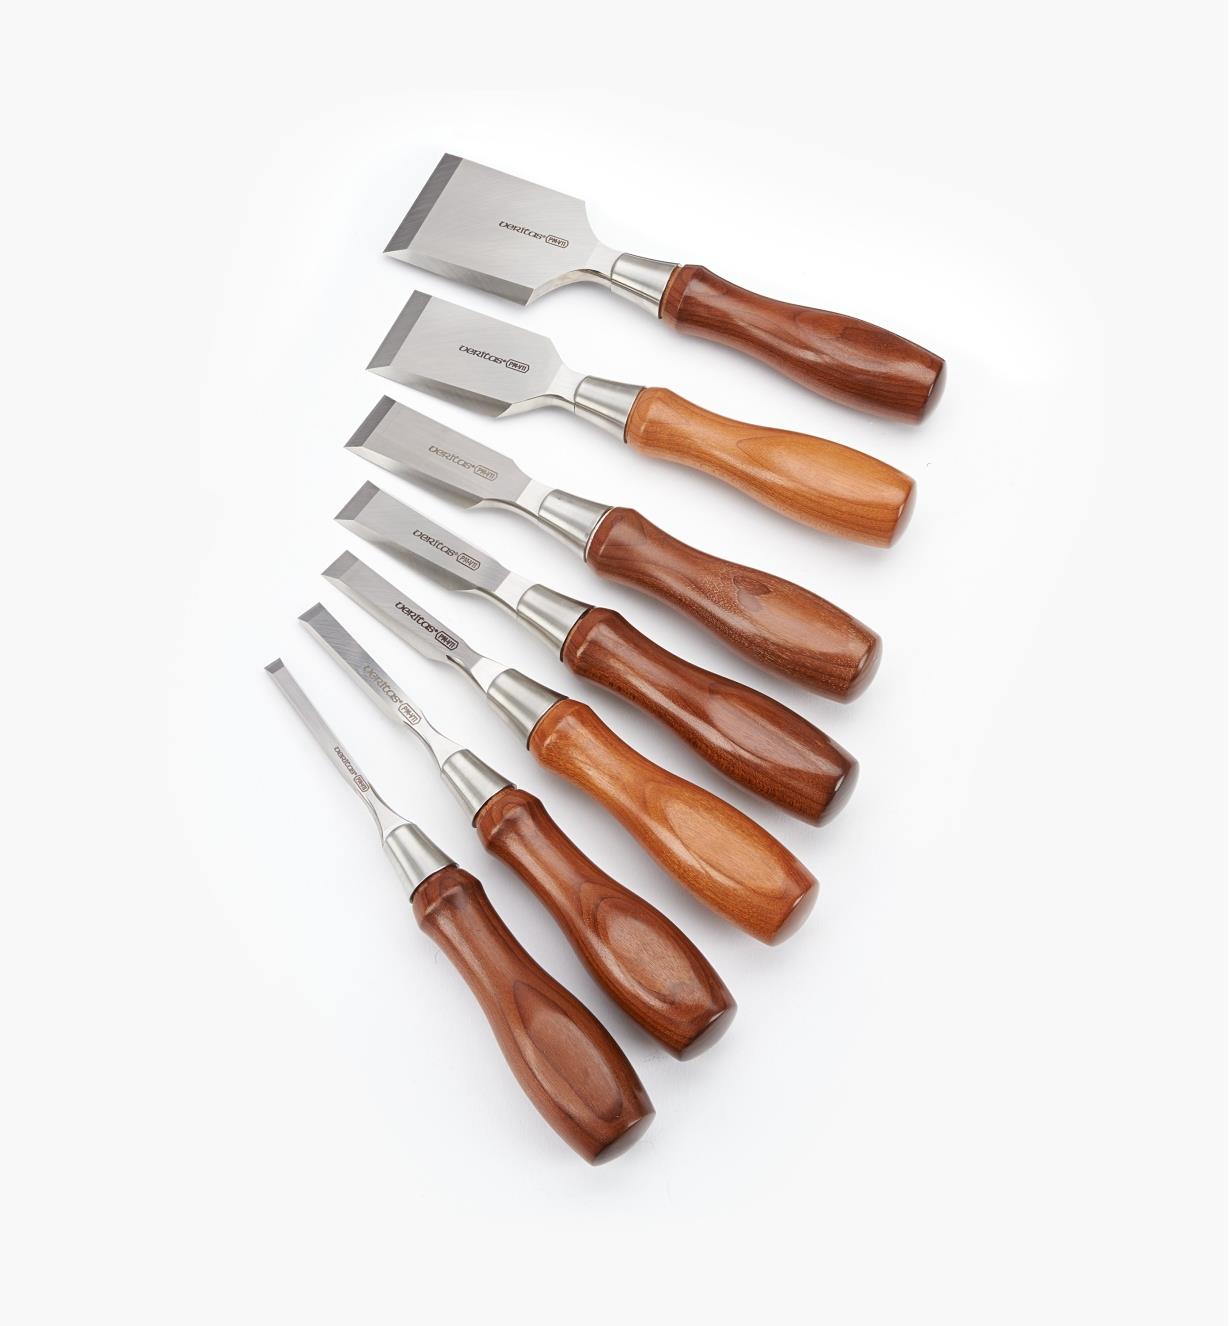 05S2665 - Set of 7 Veritas PM-V11 Butt Chisels (all sizes)